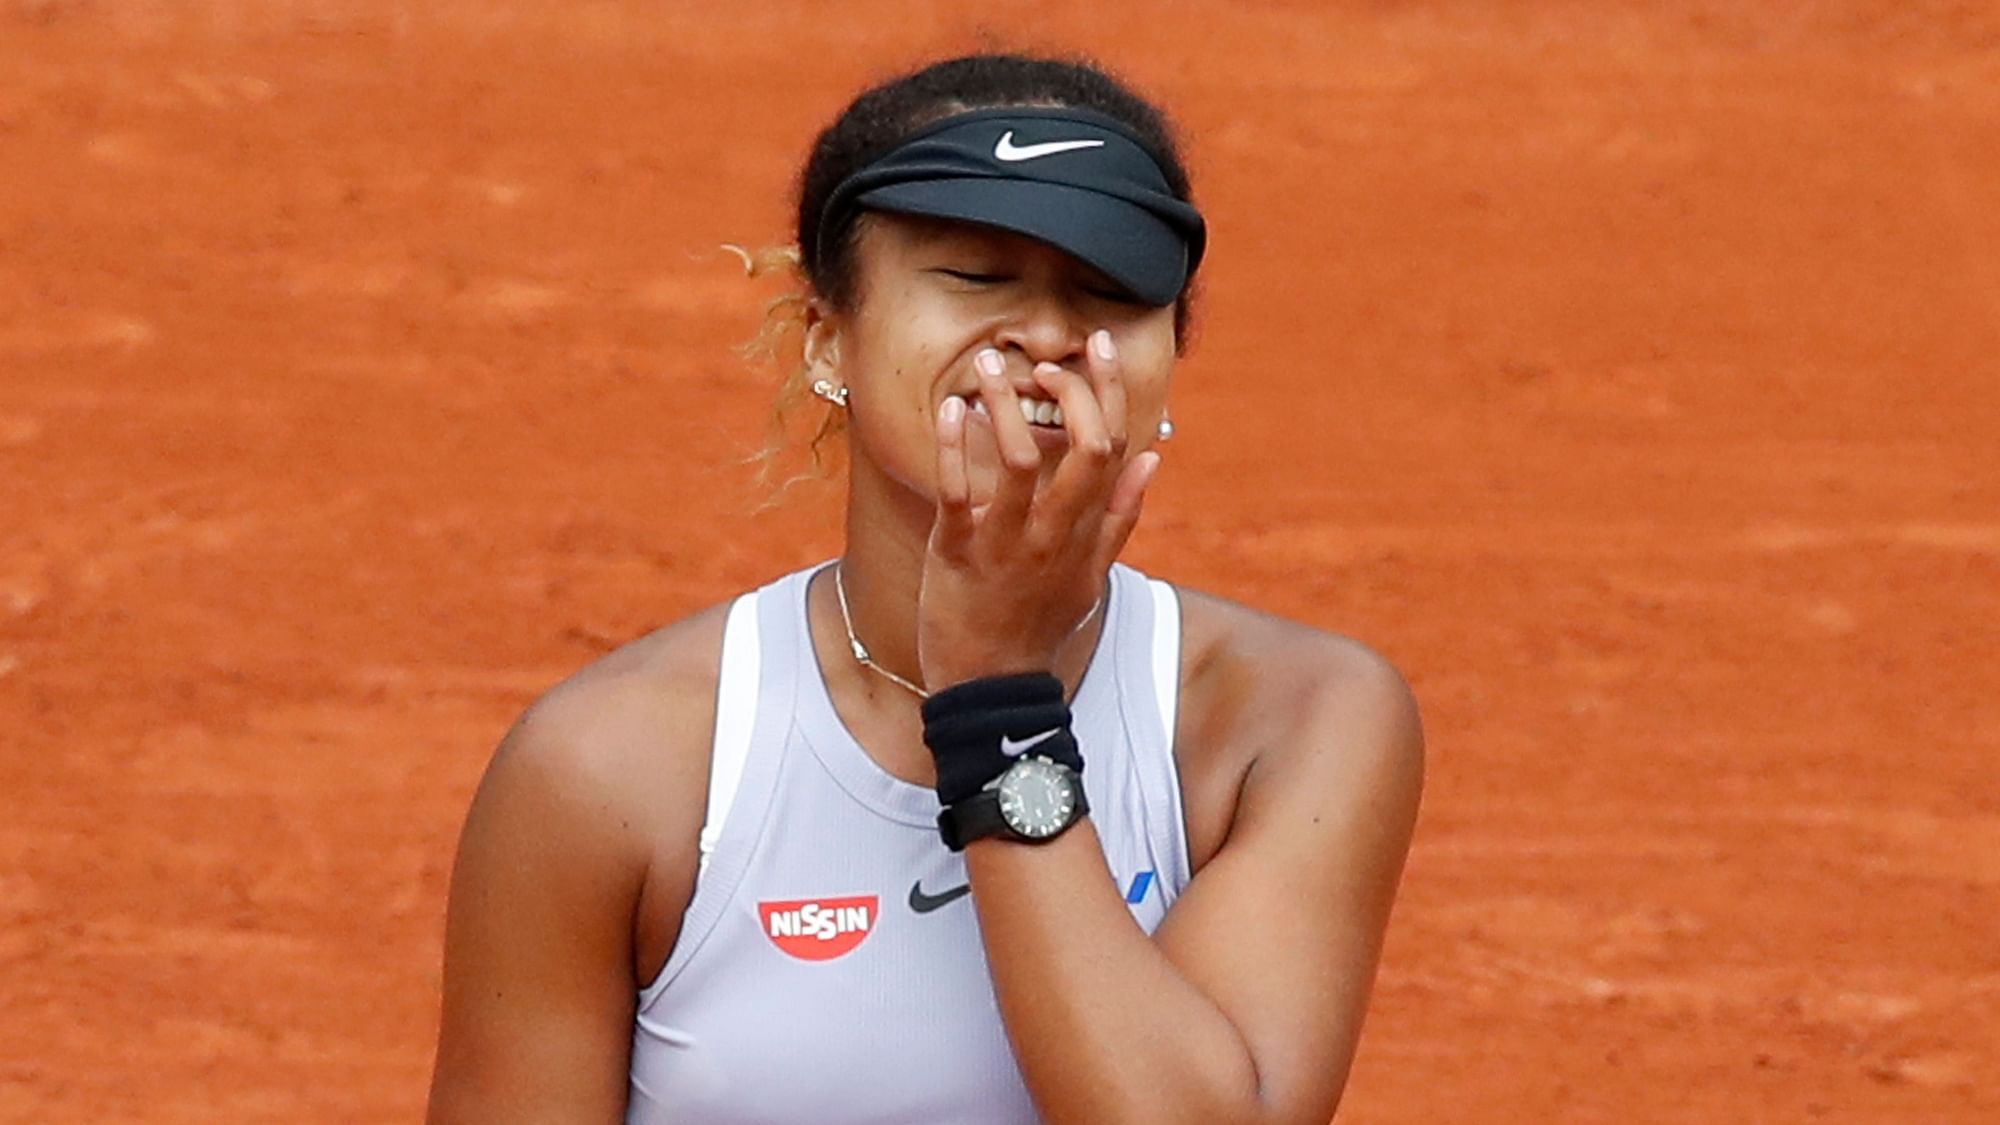 Naomi Osaka has become the highest paid female athlete in the world, topping American great Serena Williams.